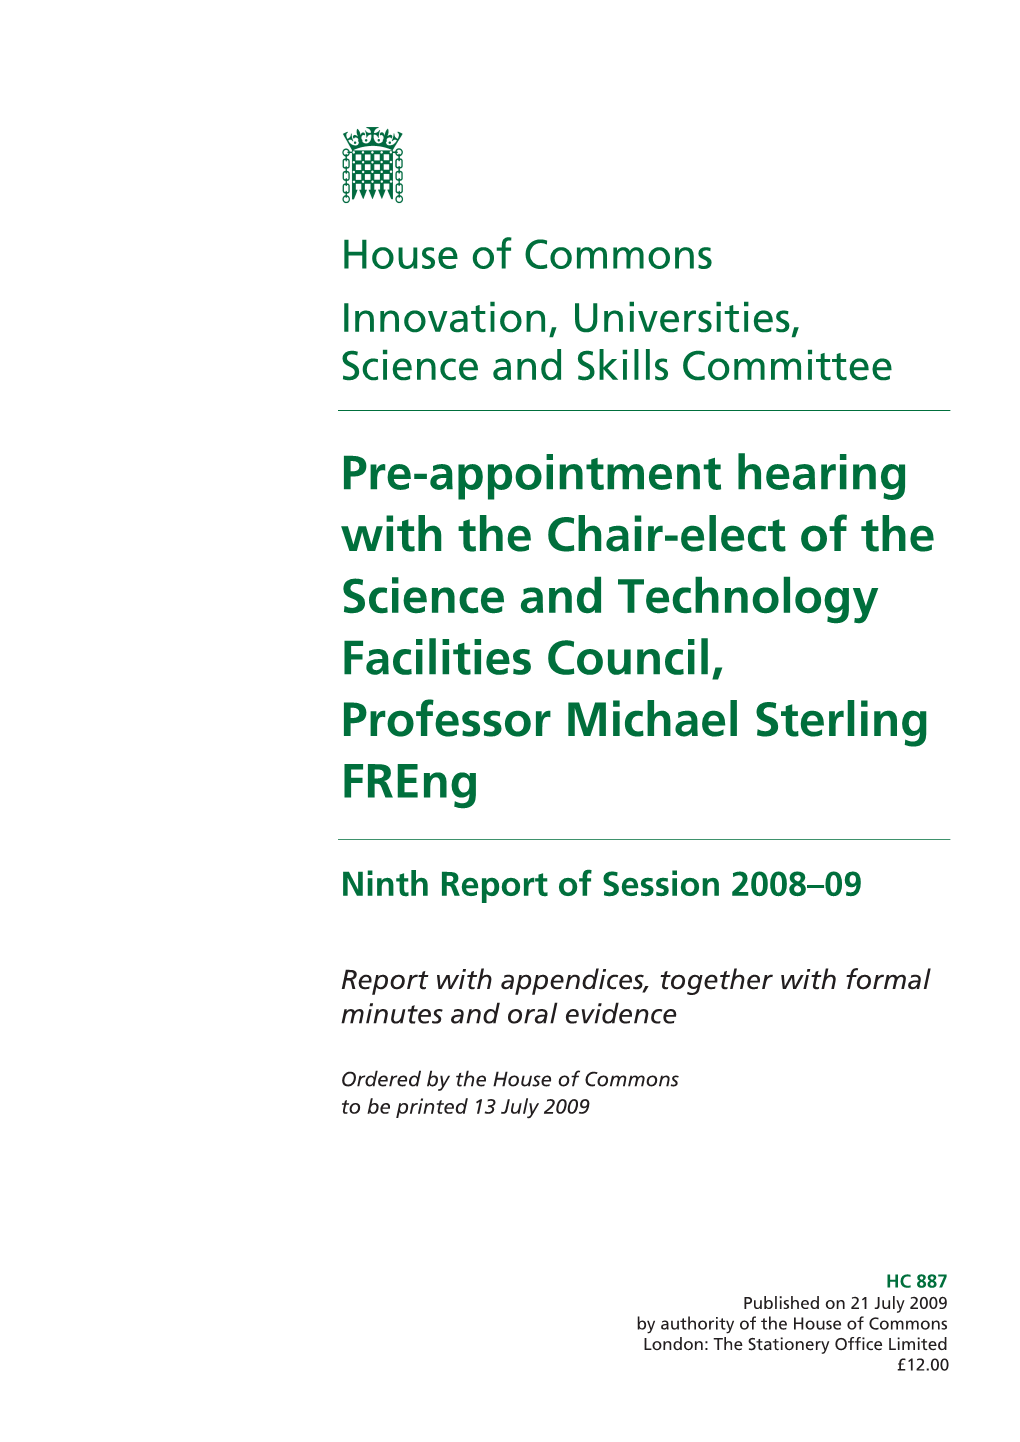 Pre-Appointment Hearing with the Chair-Elect of the Science and Technology Facilities Council, Professor Michael Sterling Freng